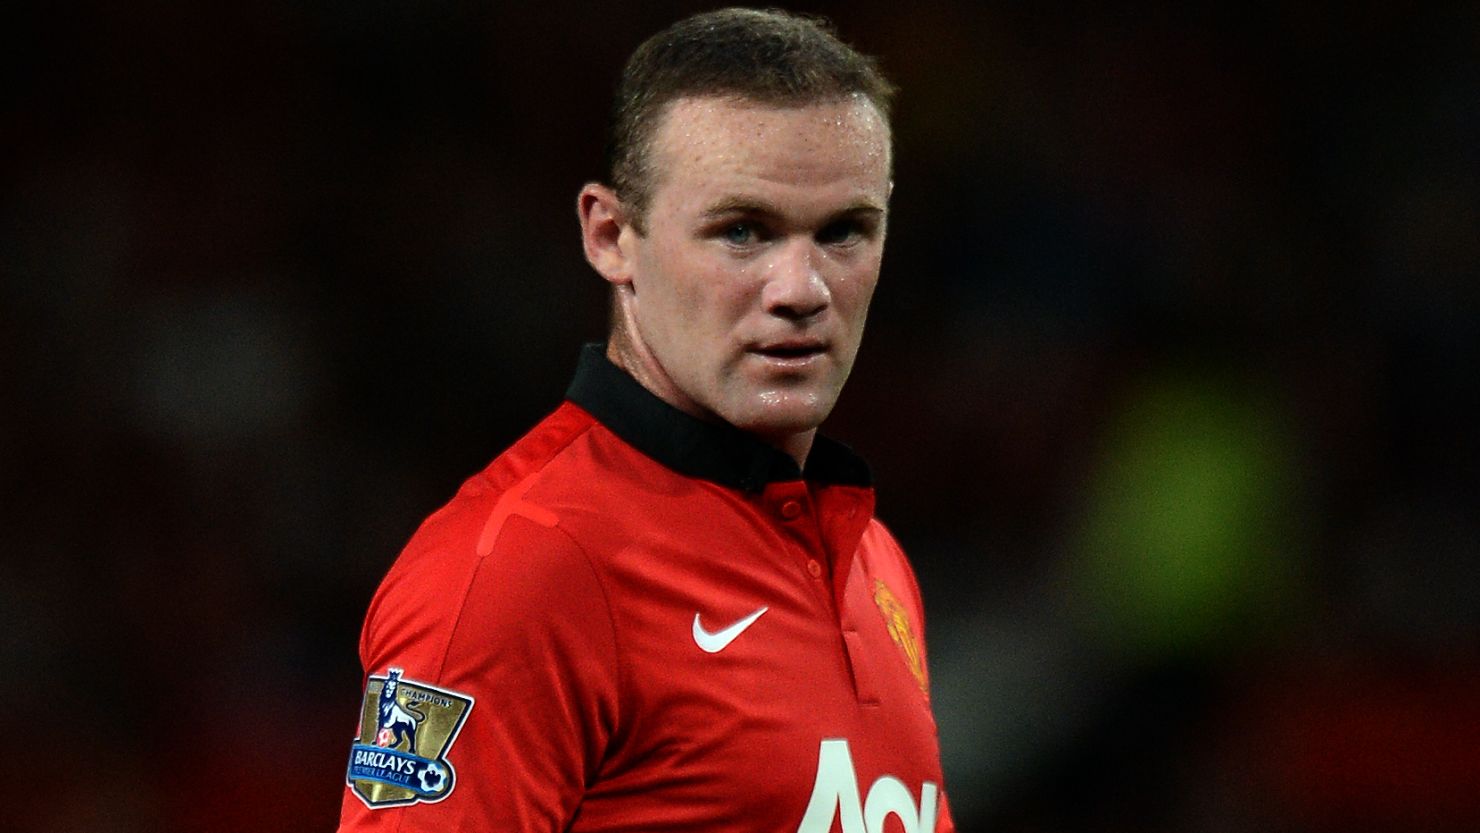 England striker Wayne Rooney joined Manchester United from Everton in 2004.